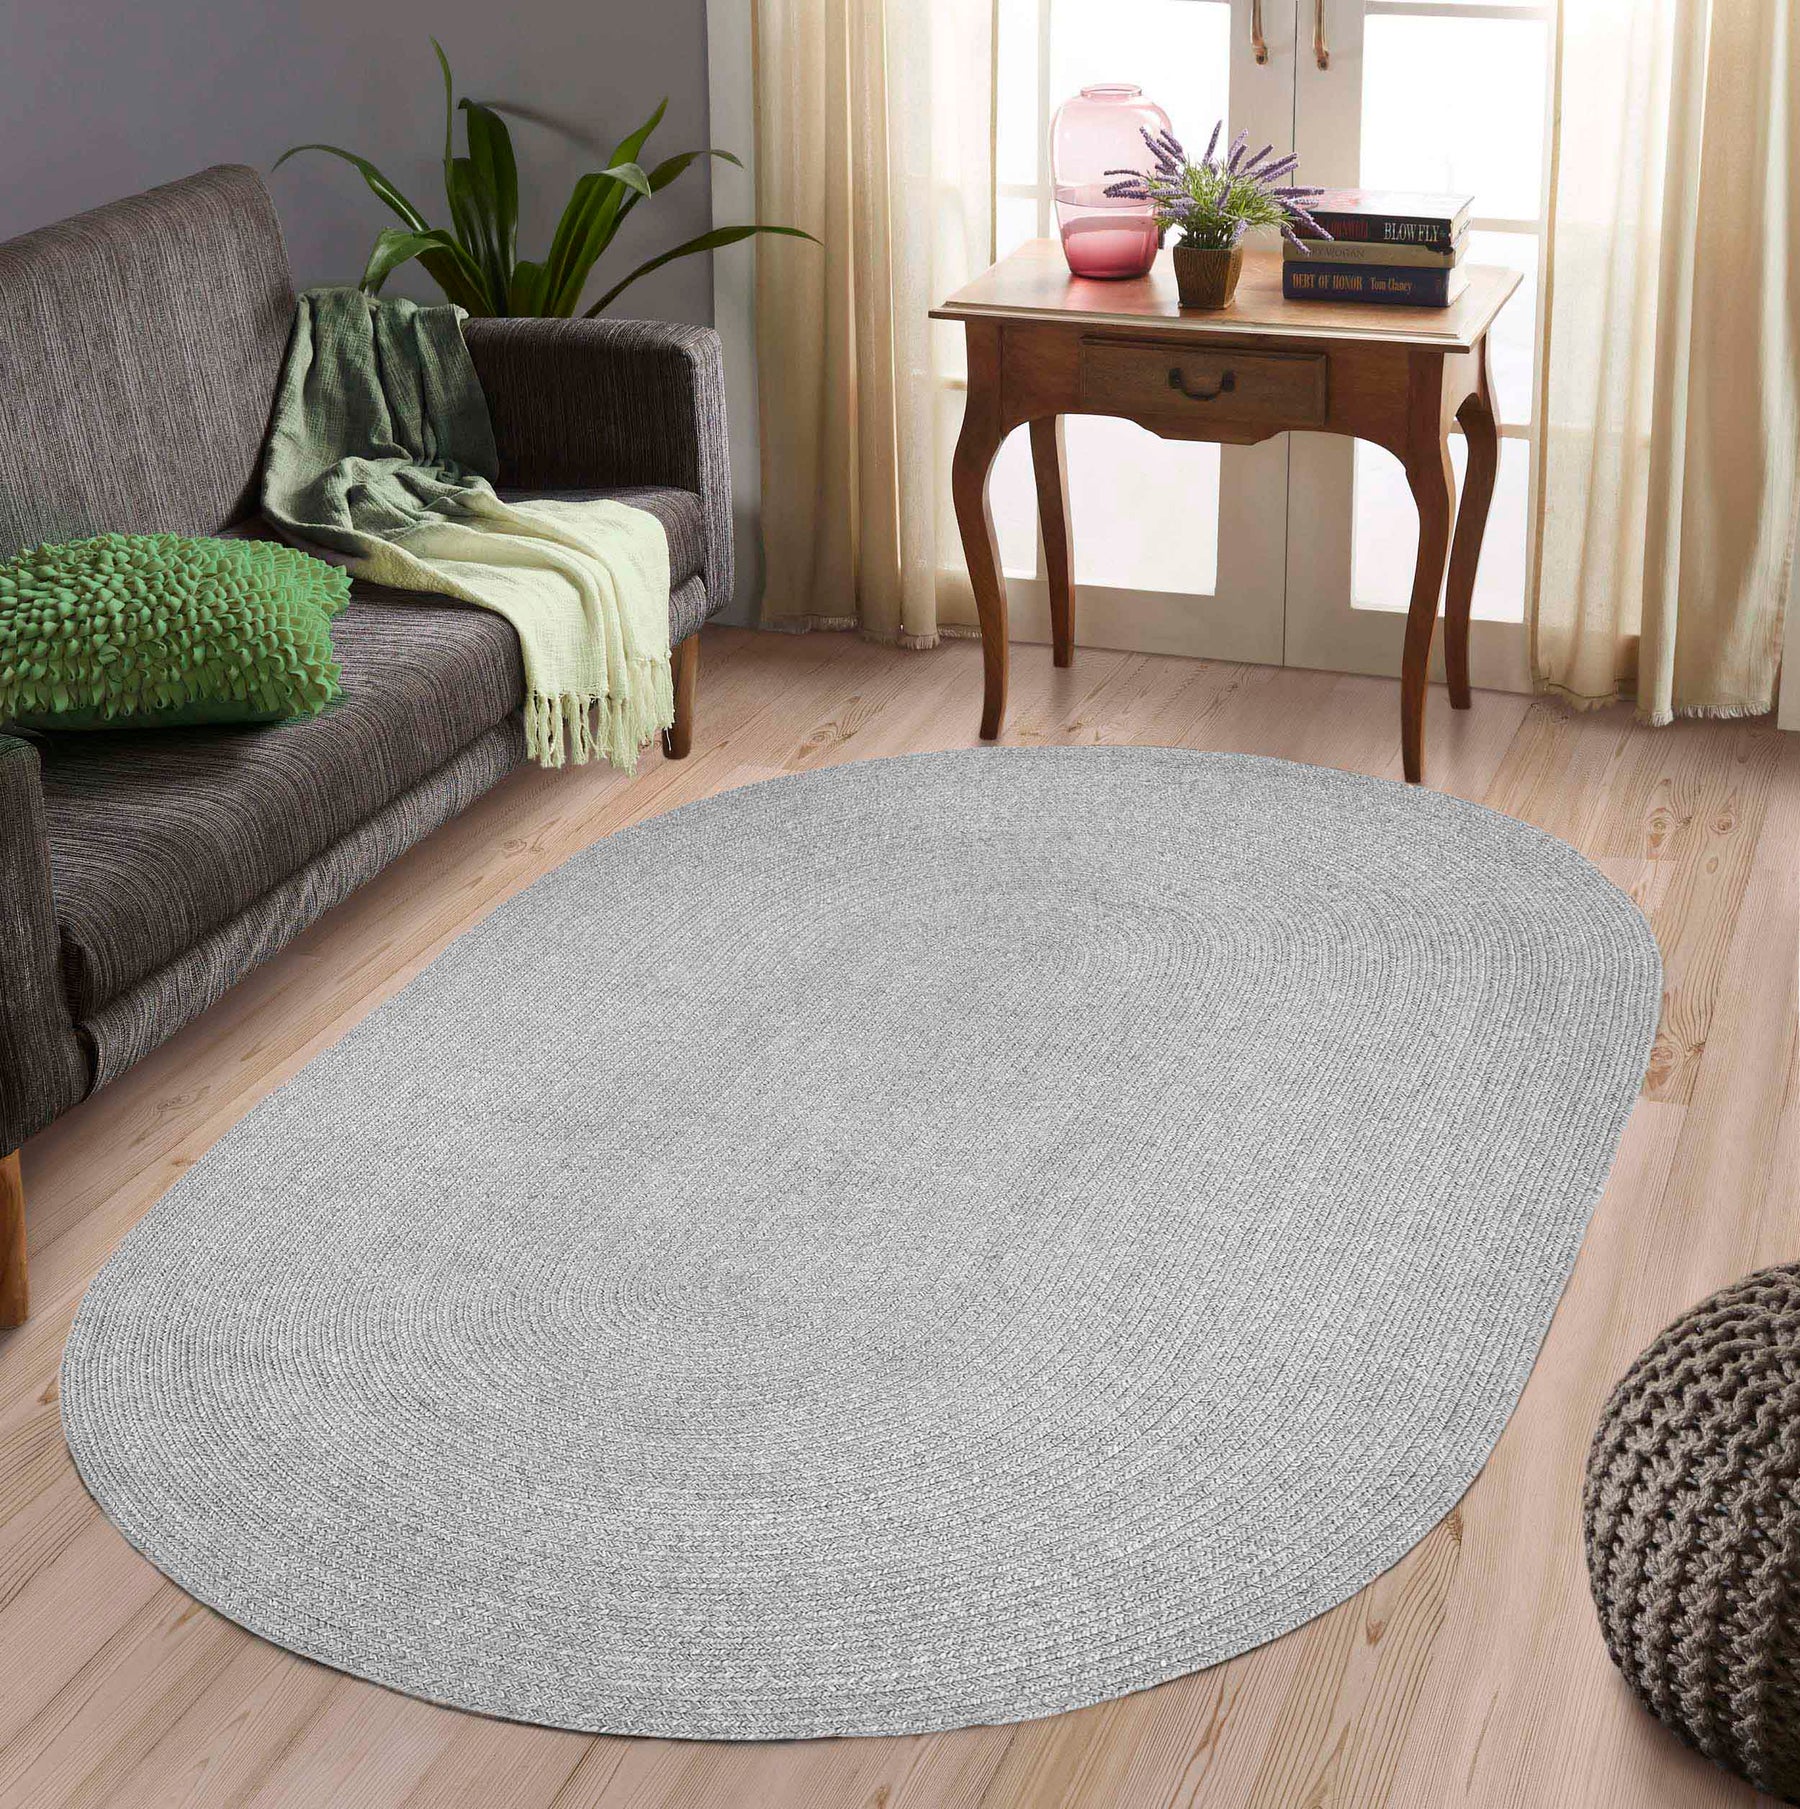 Classic Braided Weave Oval Area Rug Indoor Outdoor Rugs - Slate